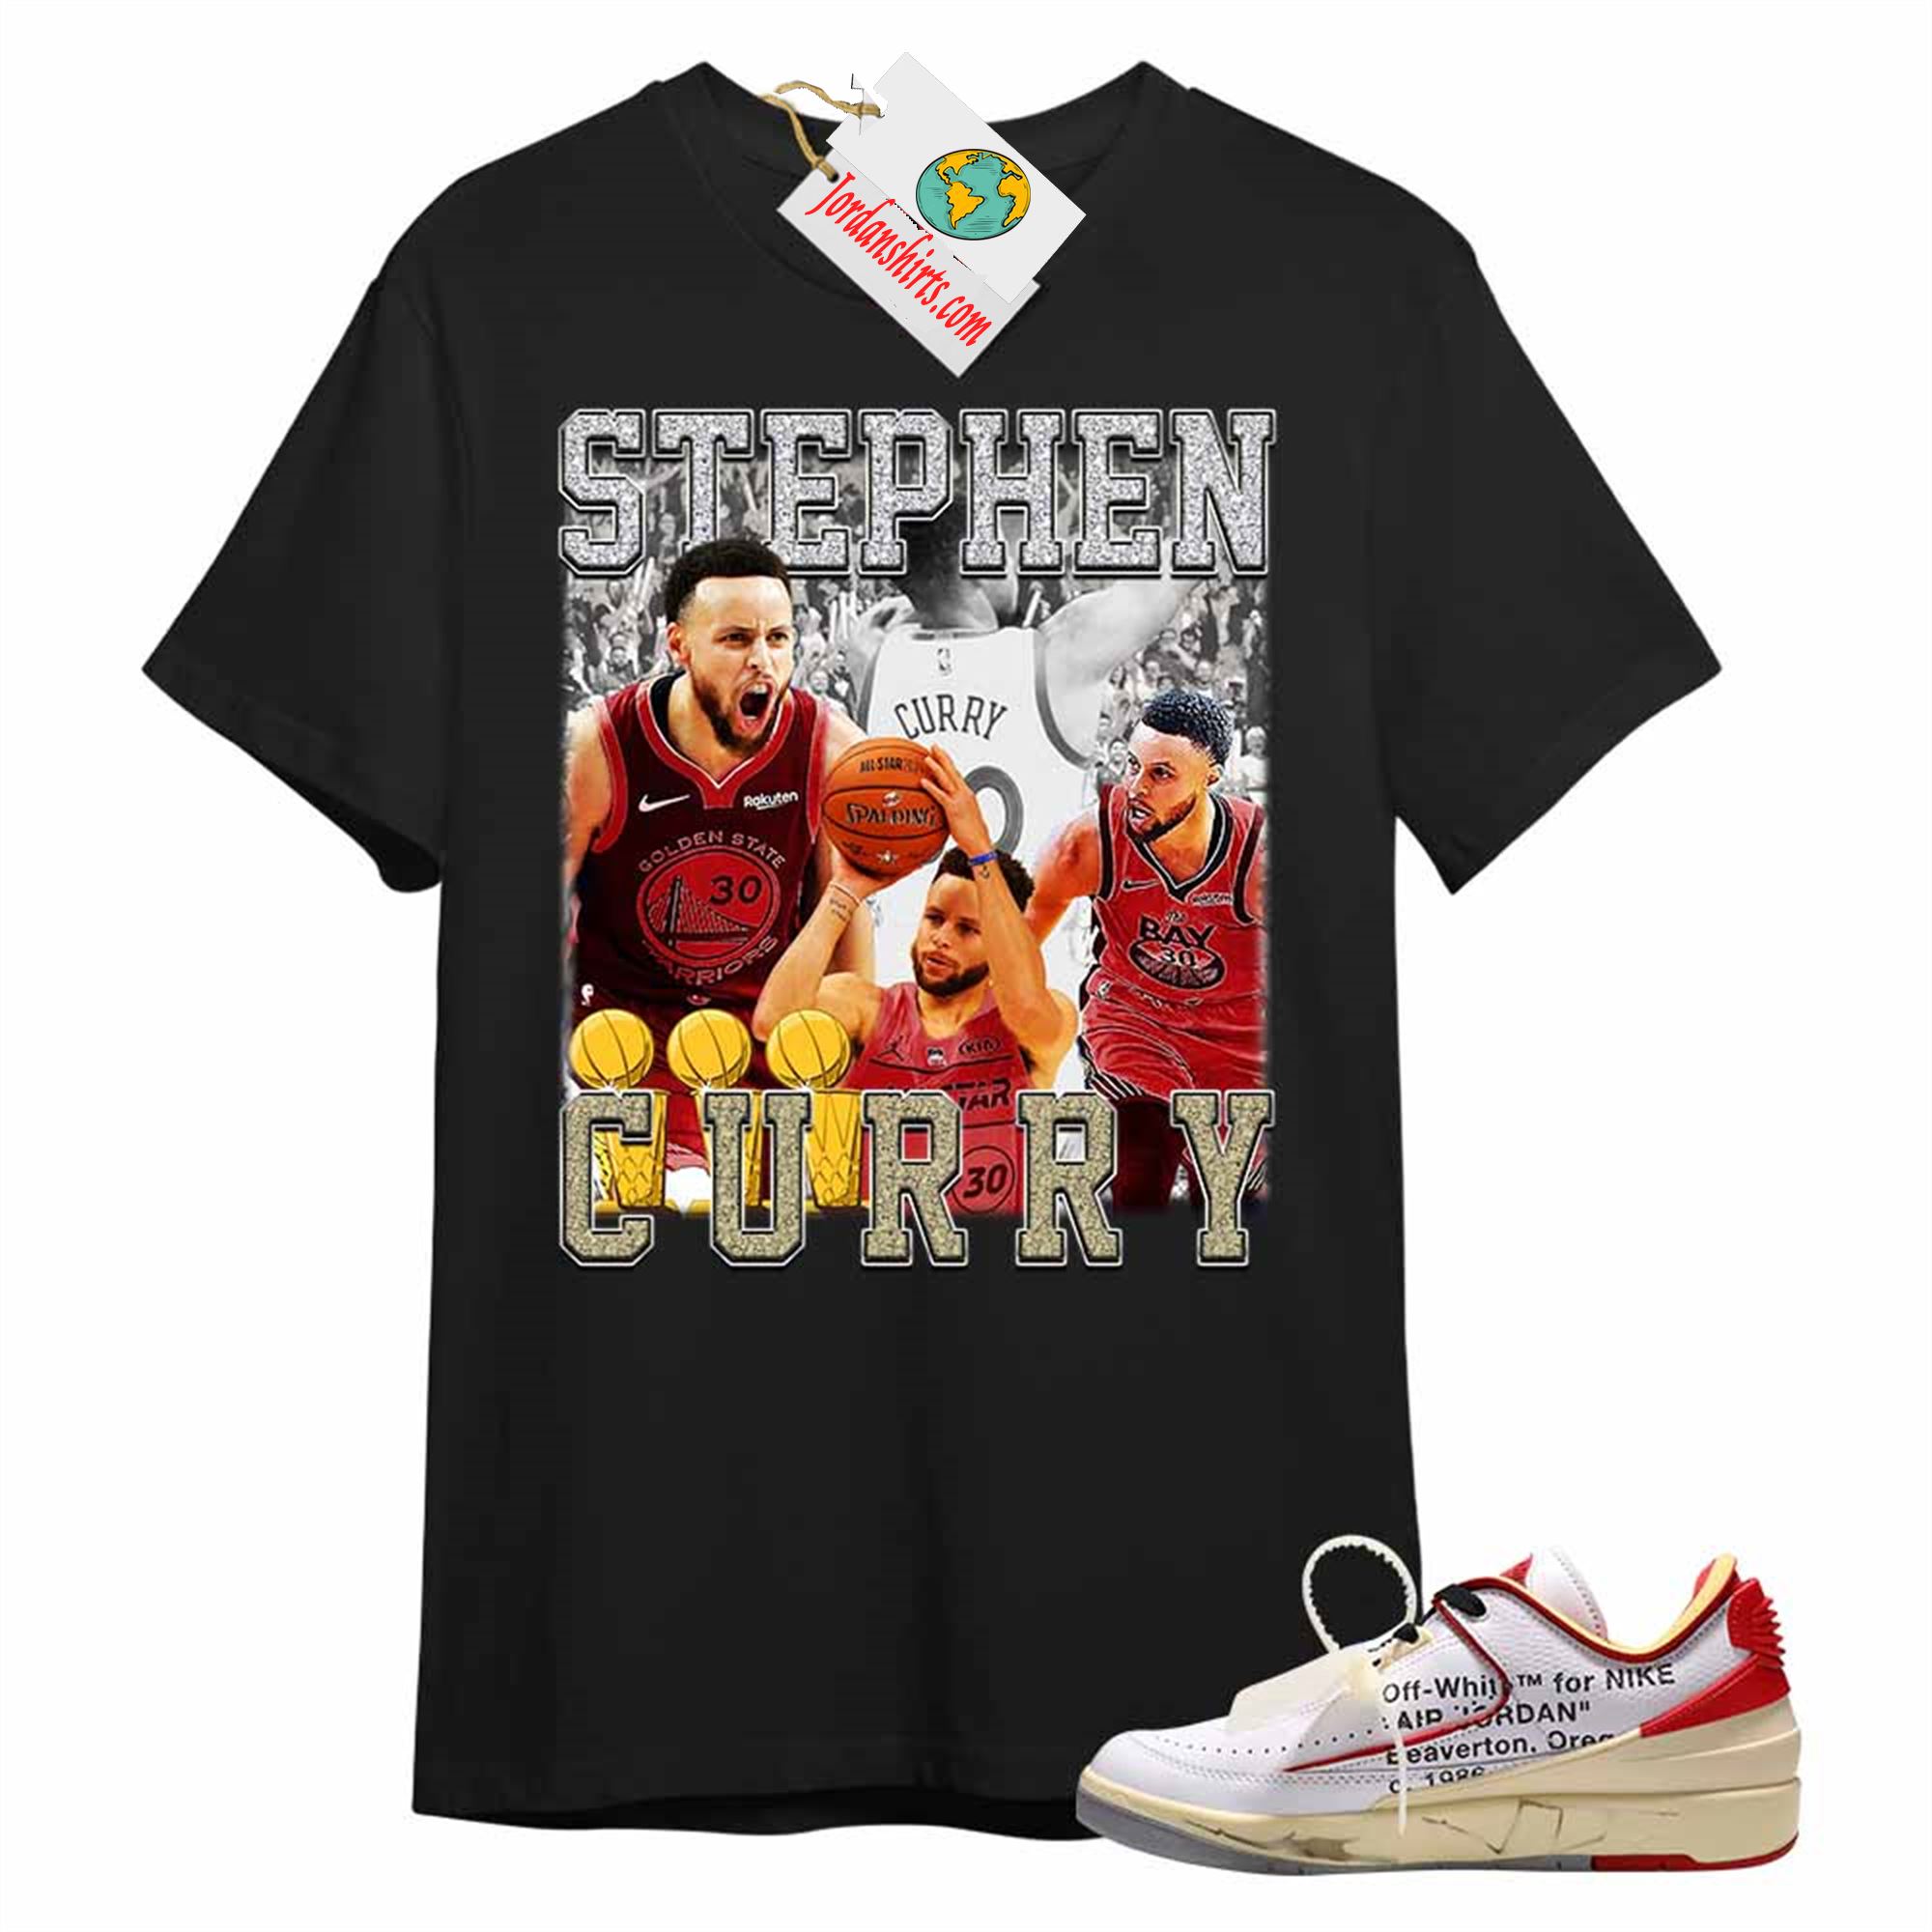 Jordan 2 Shirt, Vintage Steph Curry Basketball Retro 90s Style Black Air Jordan 2 Low White Red Off-white 2s Size Up To 5xl